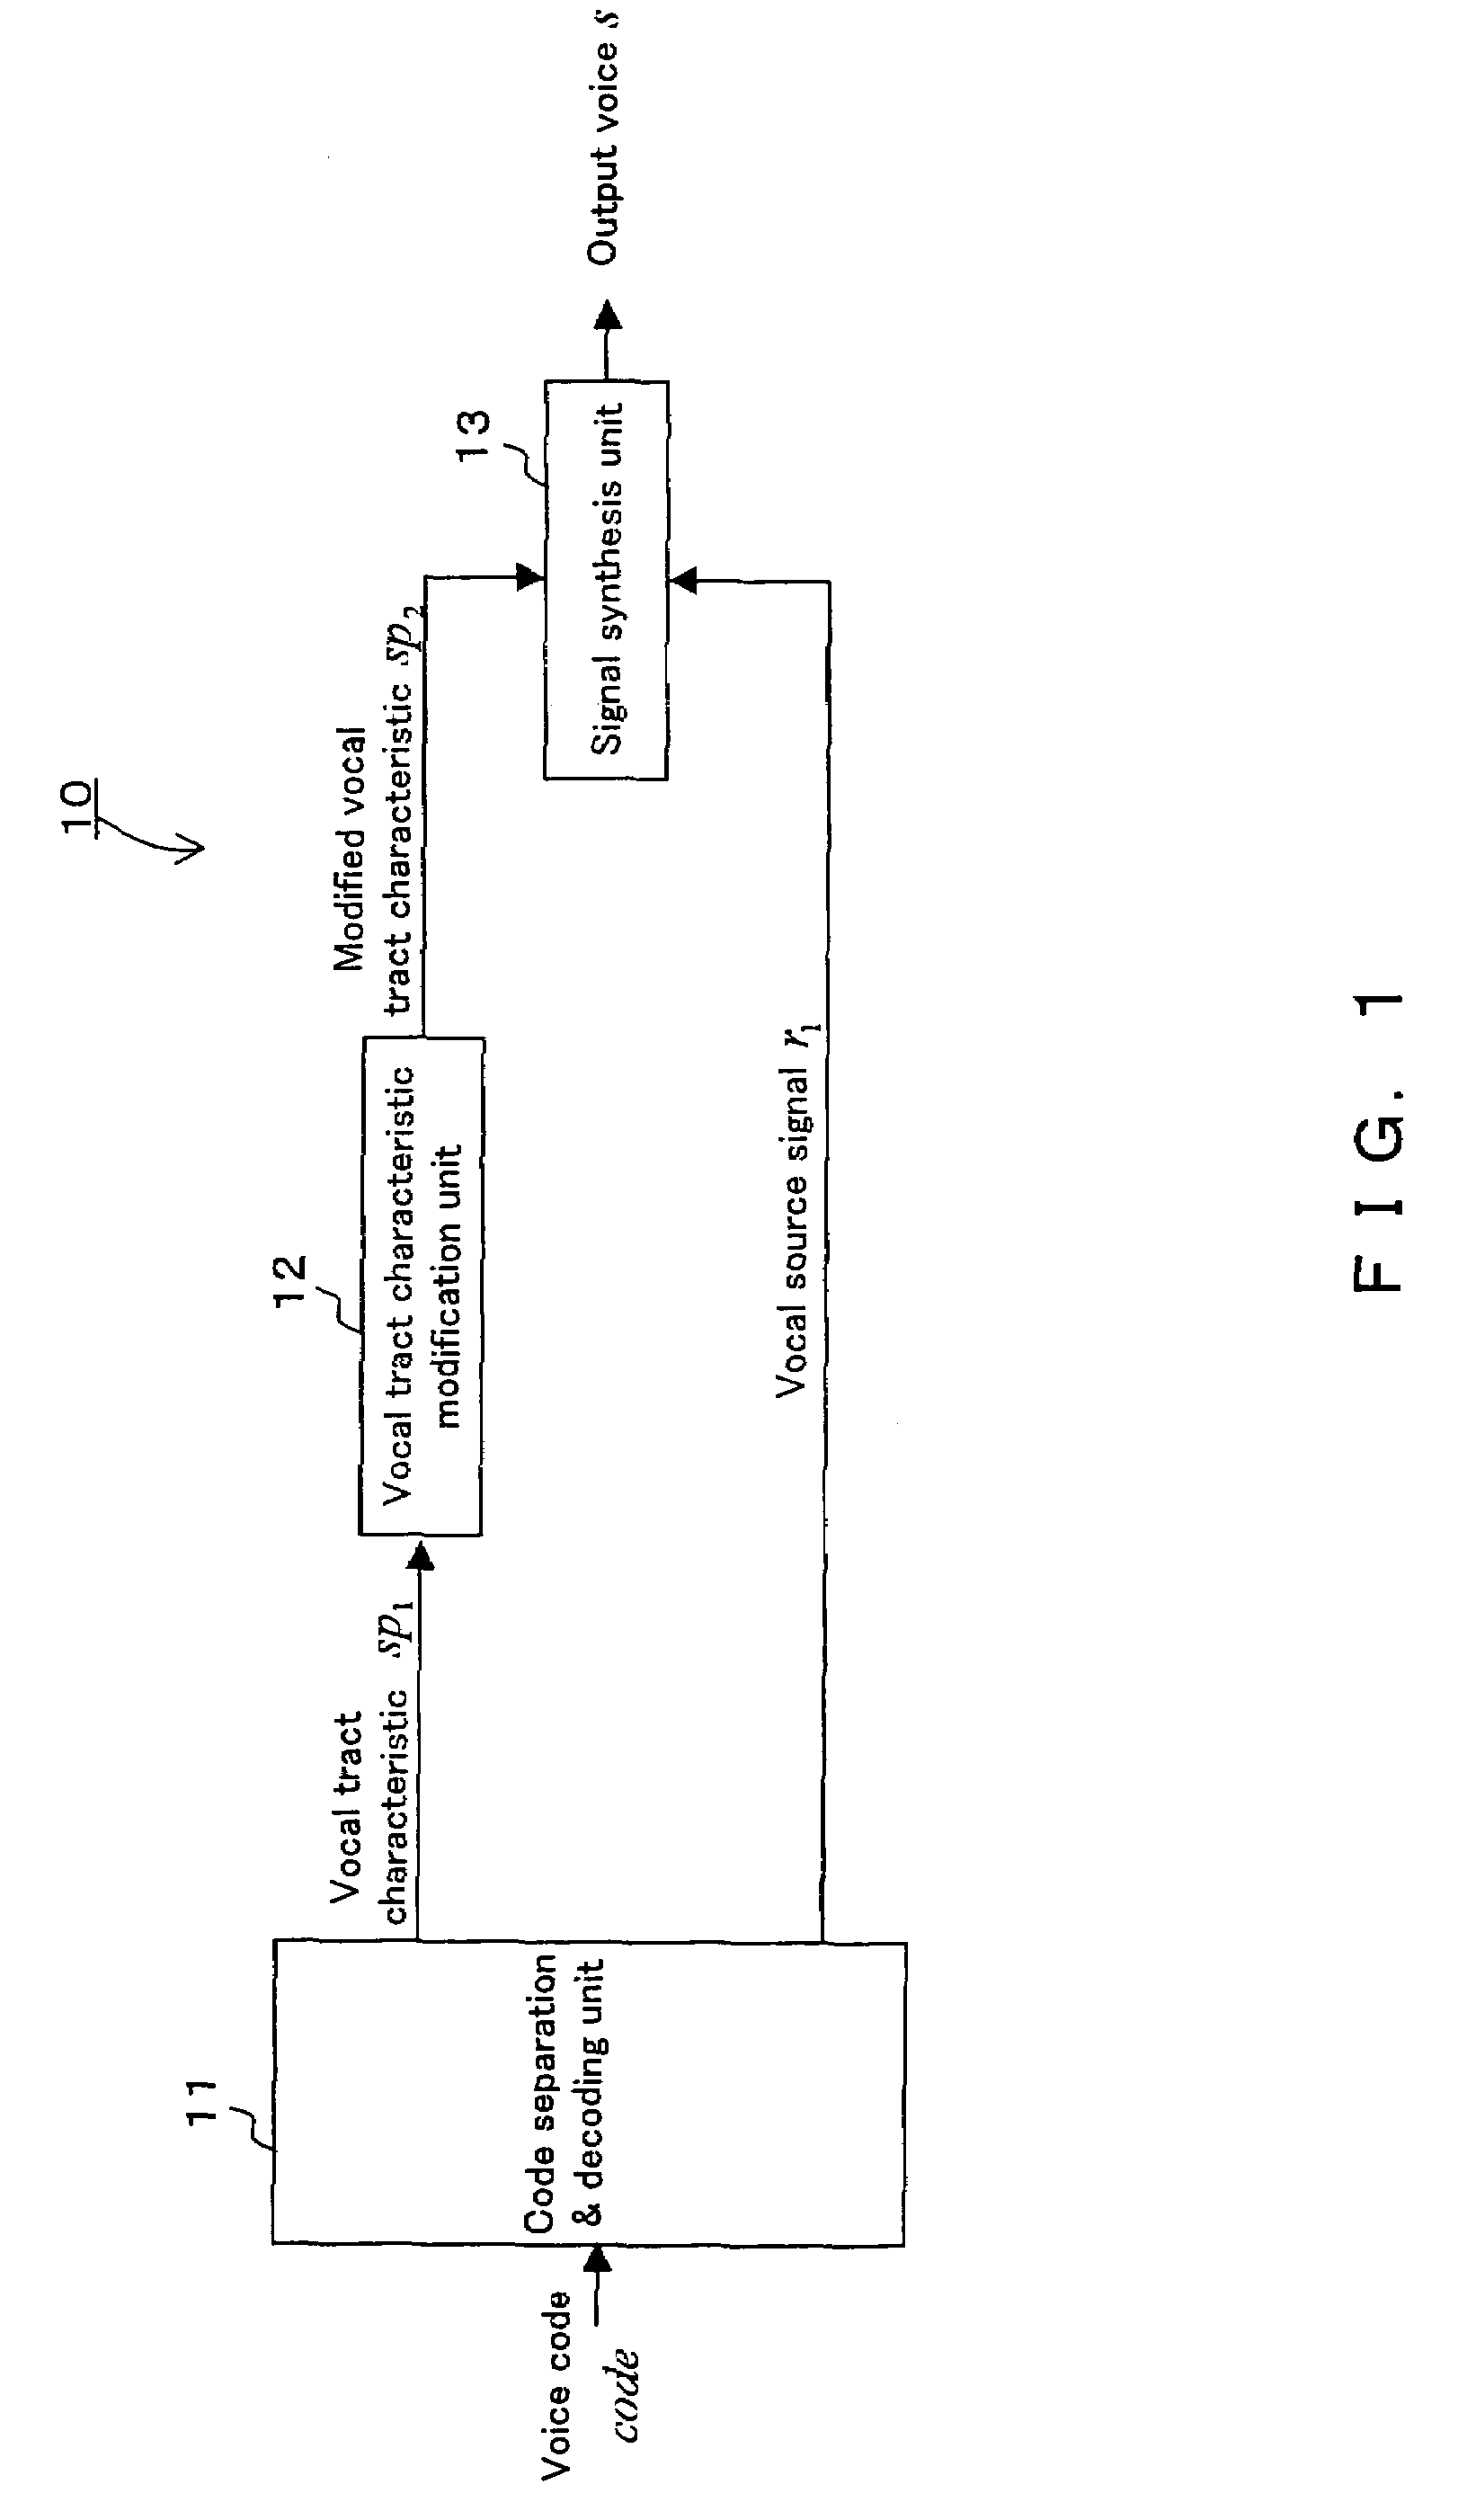 Speech decoder, speech decoding method, program and storage media to improve voice clarity by emphasizing voice tract characteristics using estimated formants